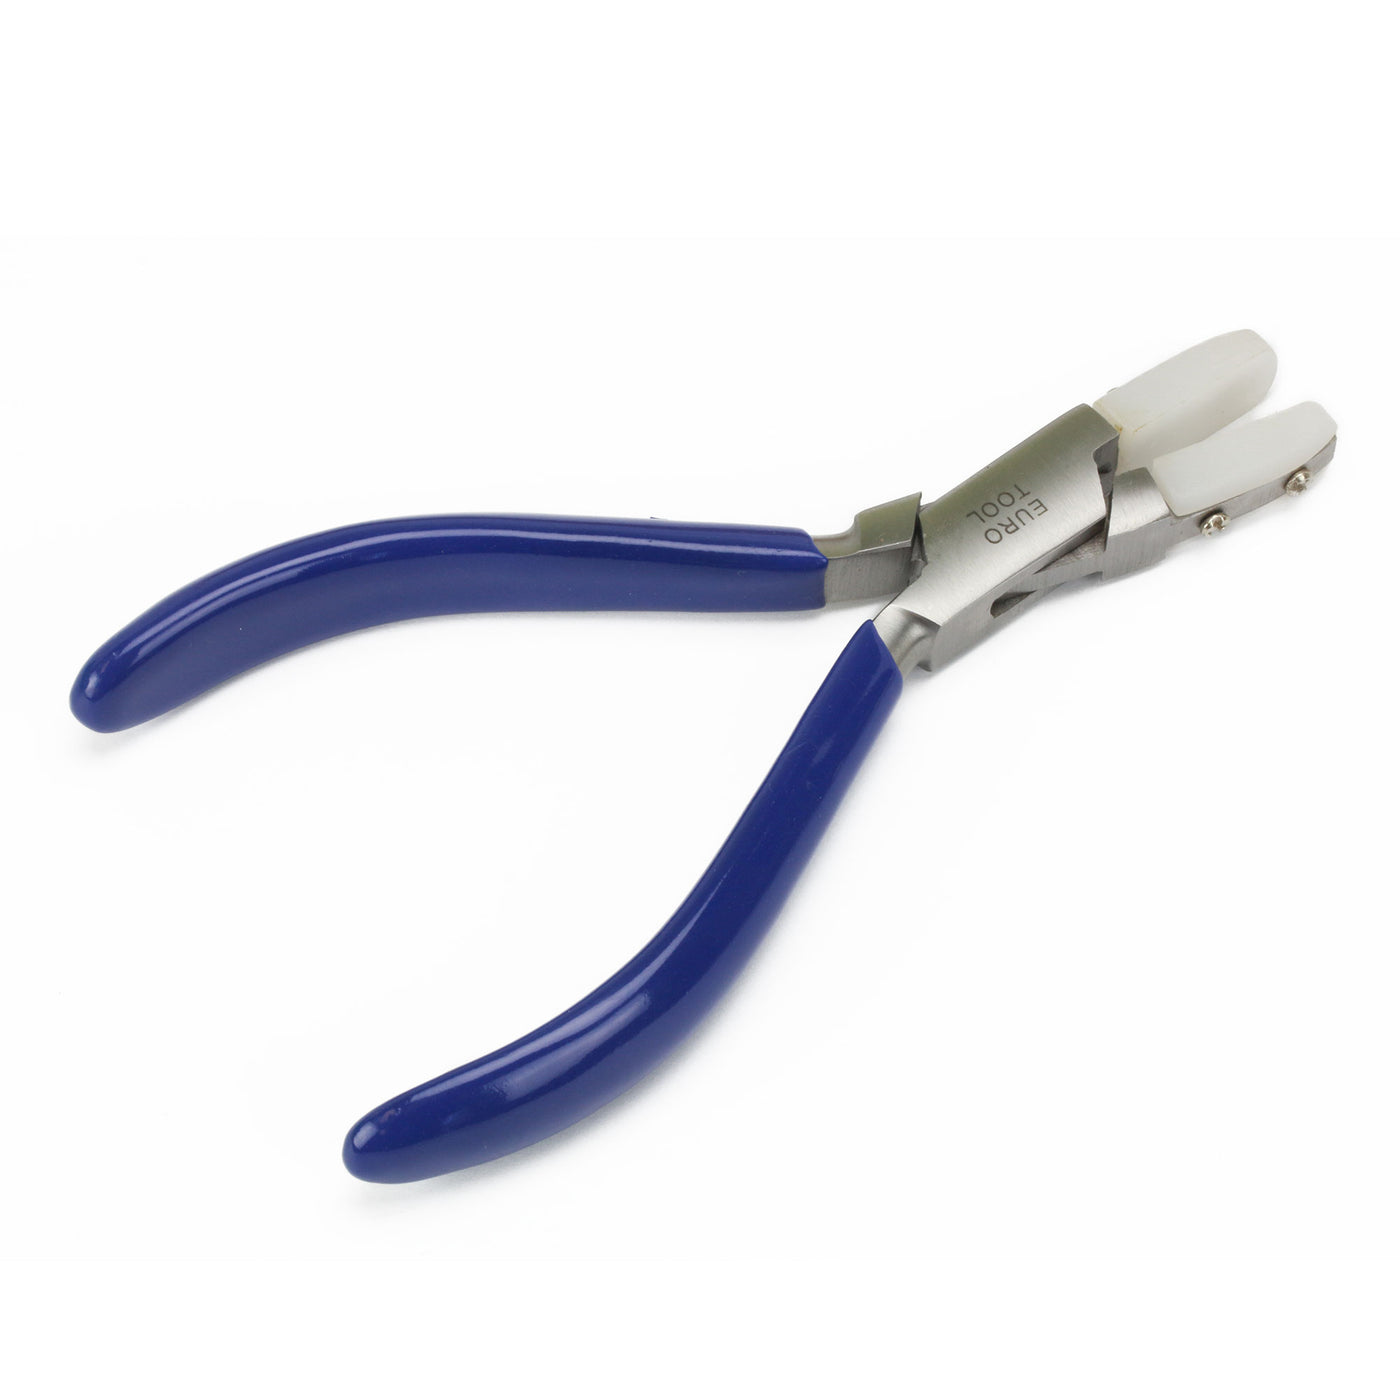 Nylon Jaw Coiling Pliers, Round and Flat Jaw, 5-1/2 Inches PLR-846.00 